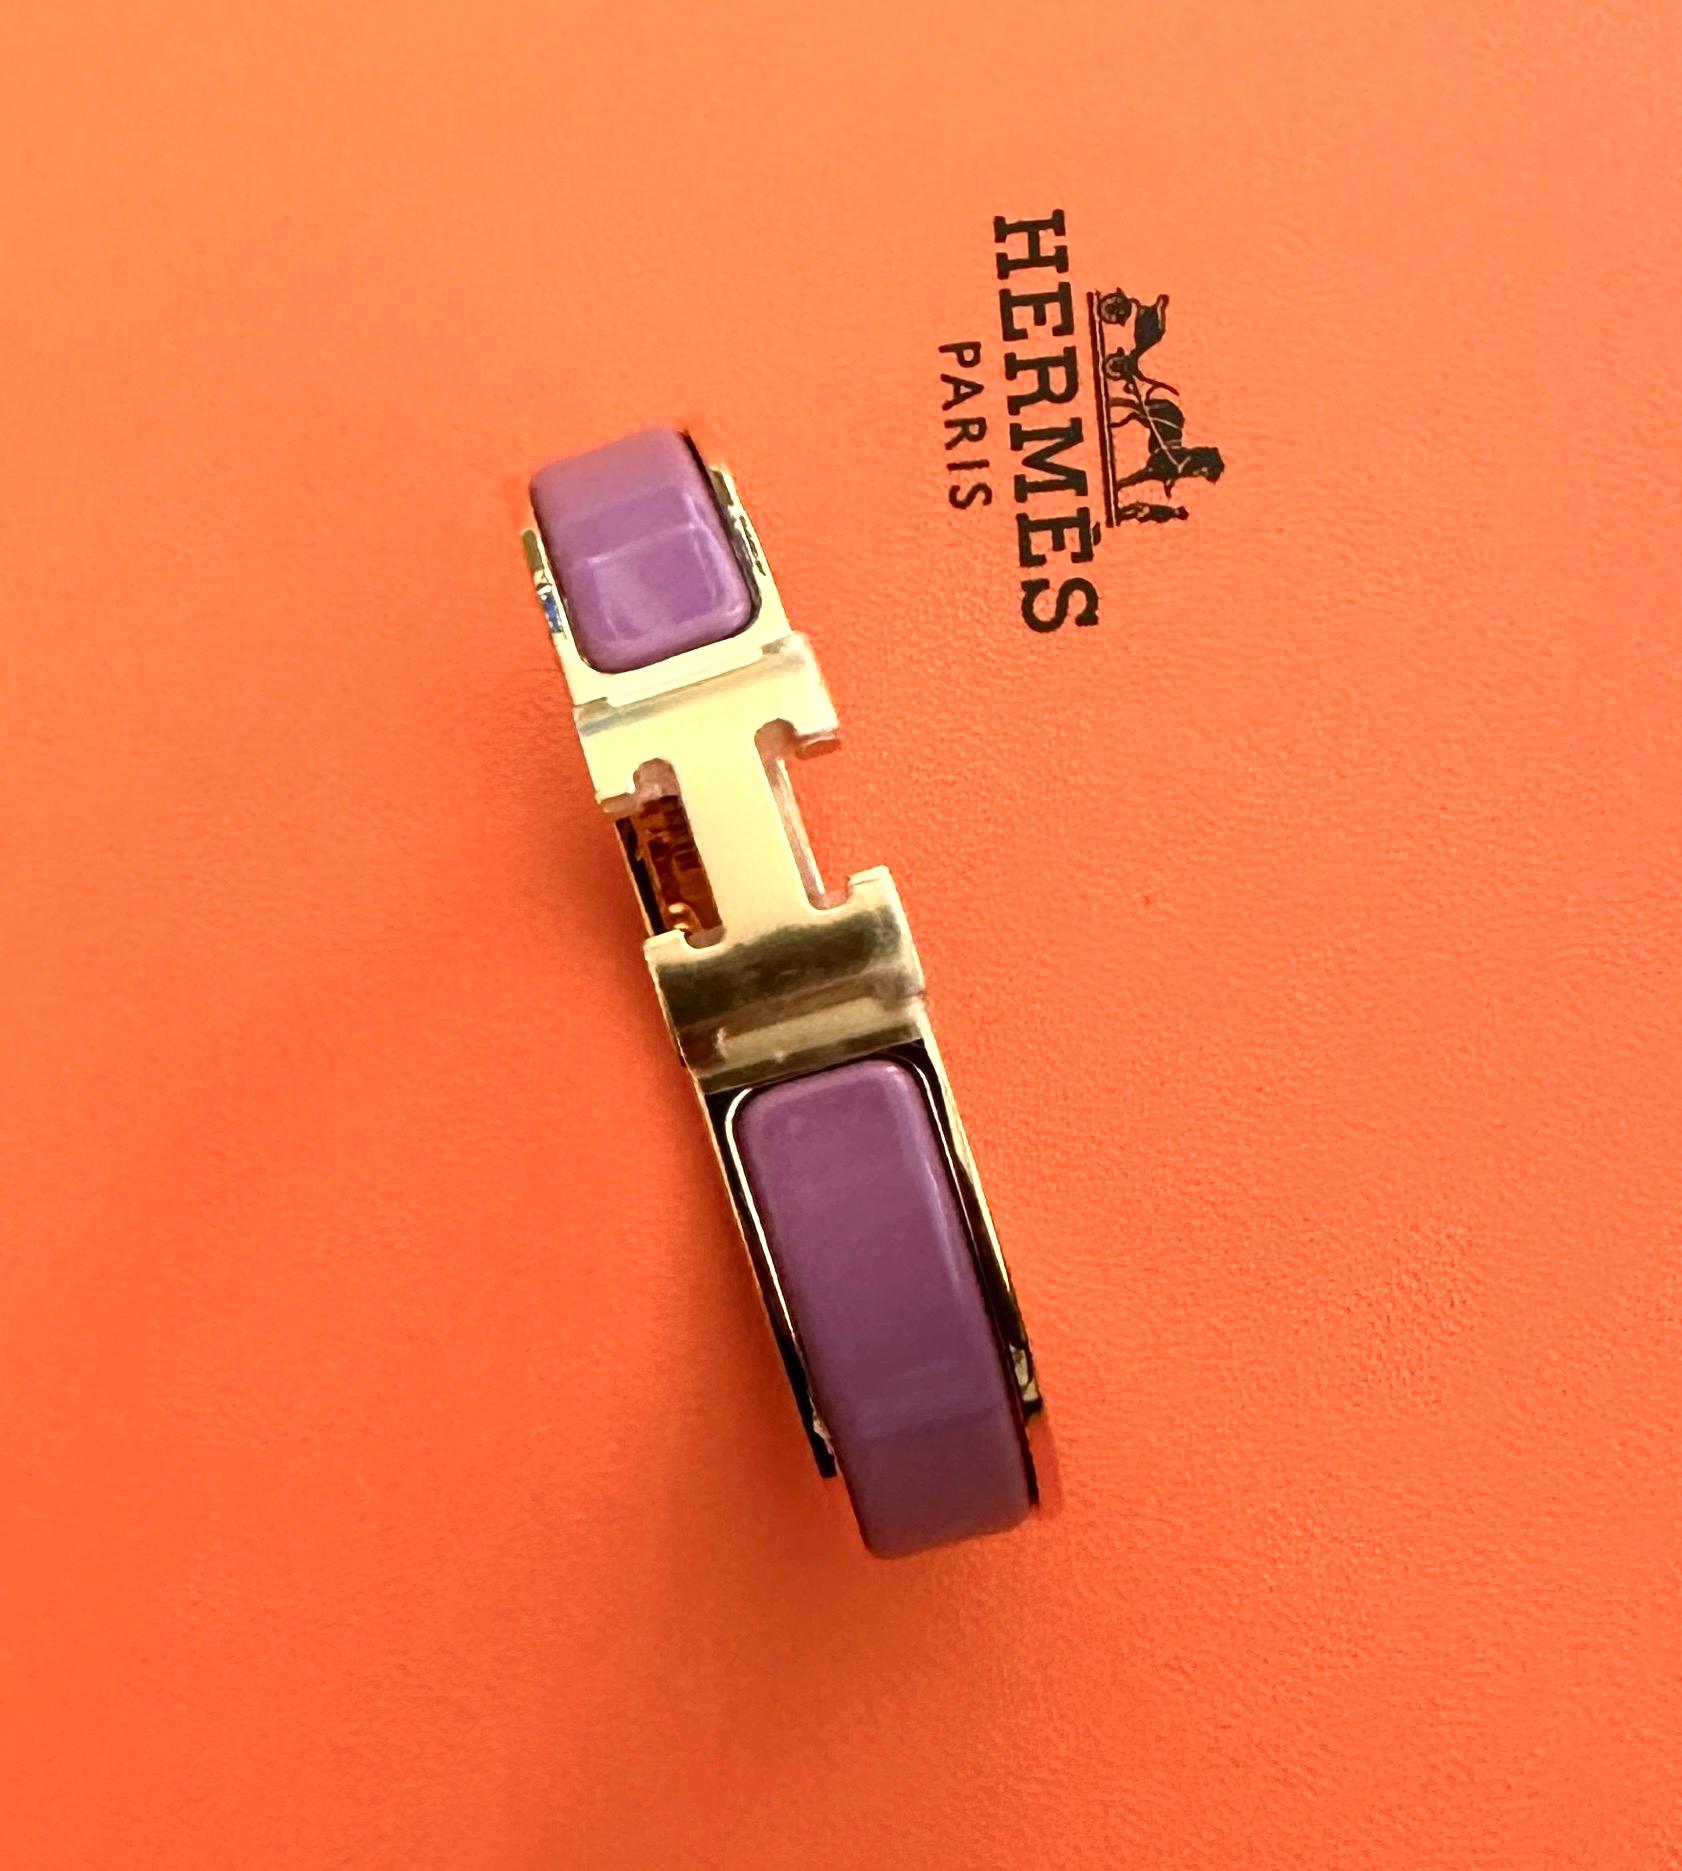 The Clic Clac H Pm
Pm SIZE 
Hermes bracelet in Yellow Gold Plated 
Color is Rose Cendre
Brand new
New unworn

COMES IN HERMES GIFT BOX WITH DUSTCOVER